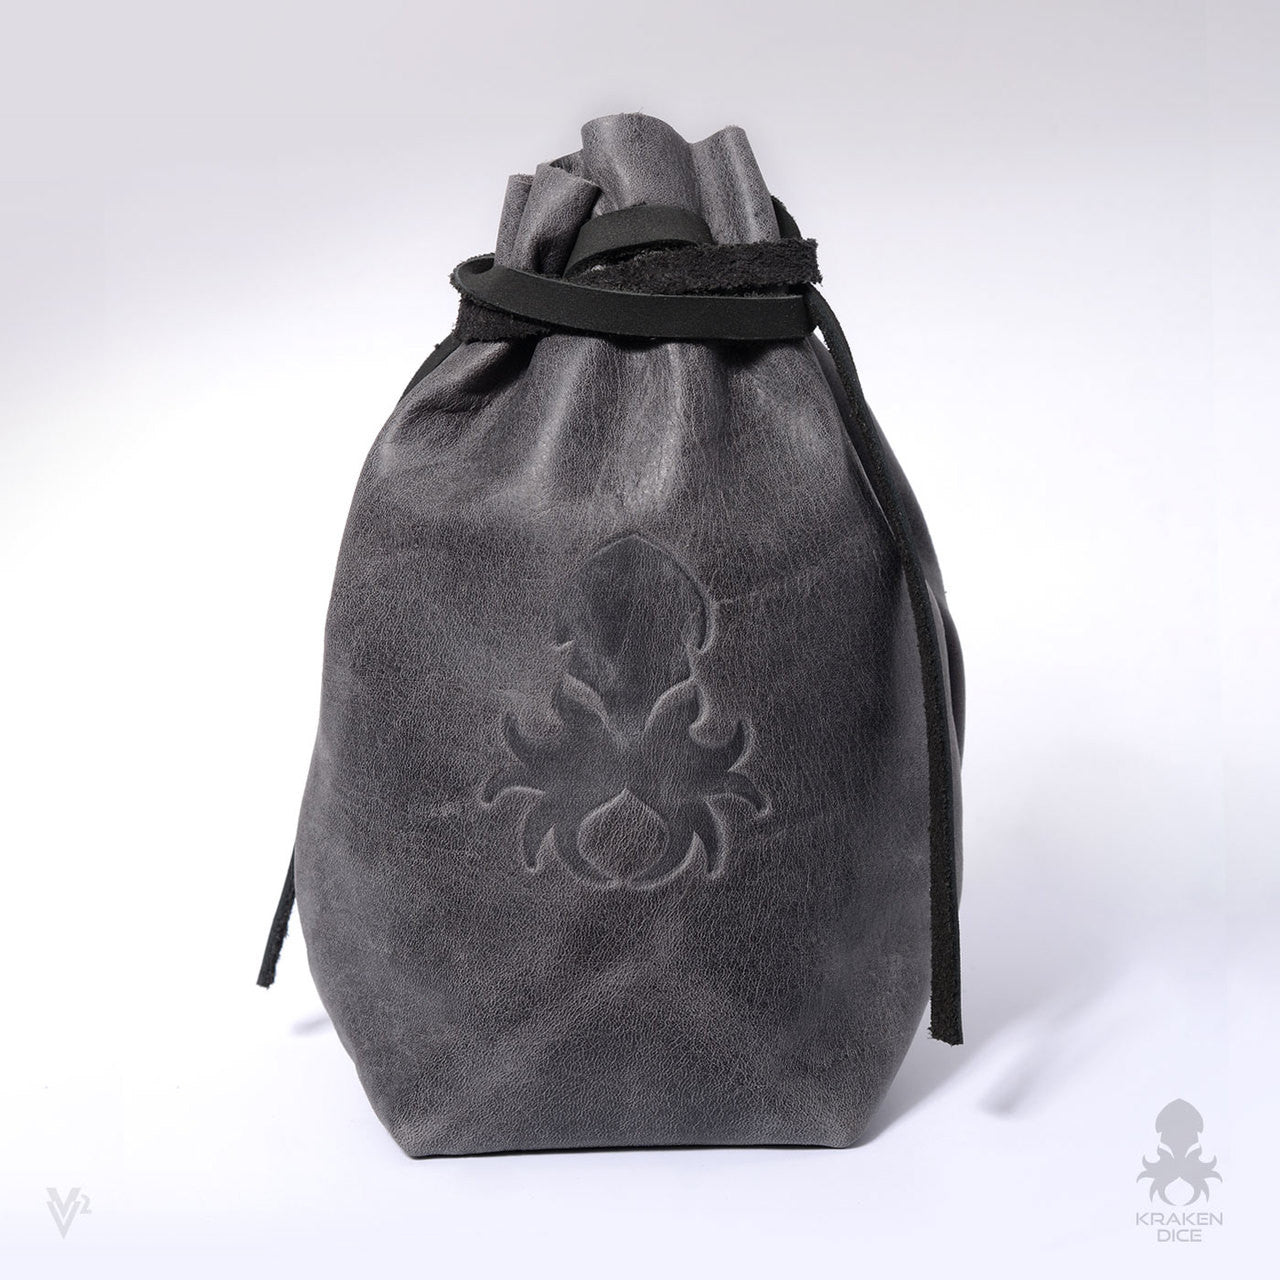 Freestanding Large Dice Bag In Old World Leather